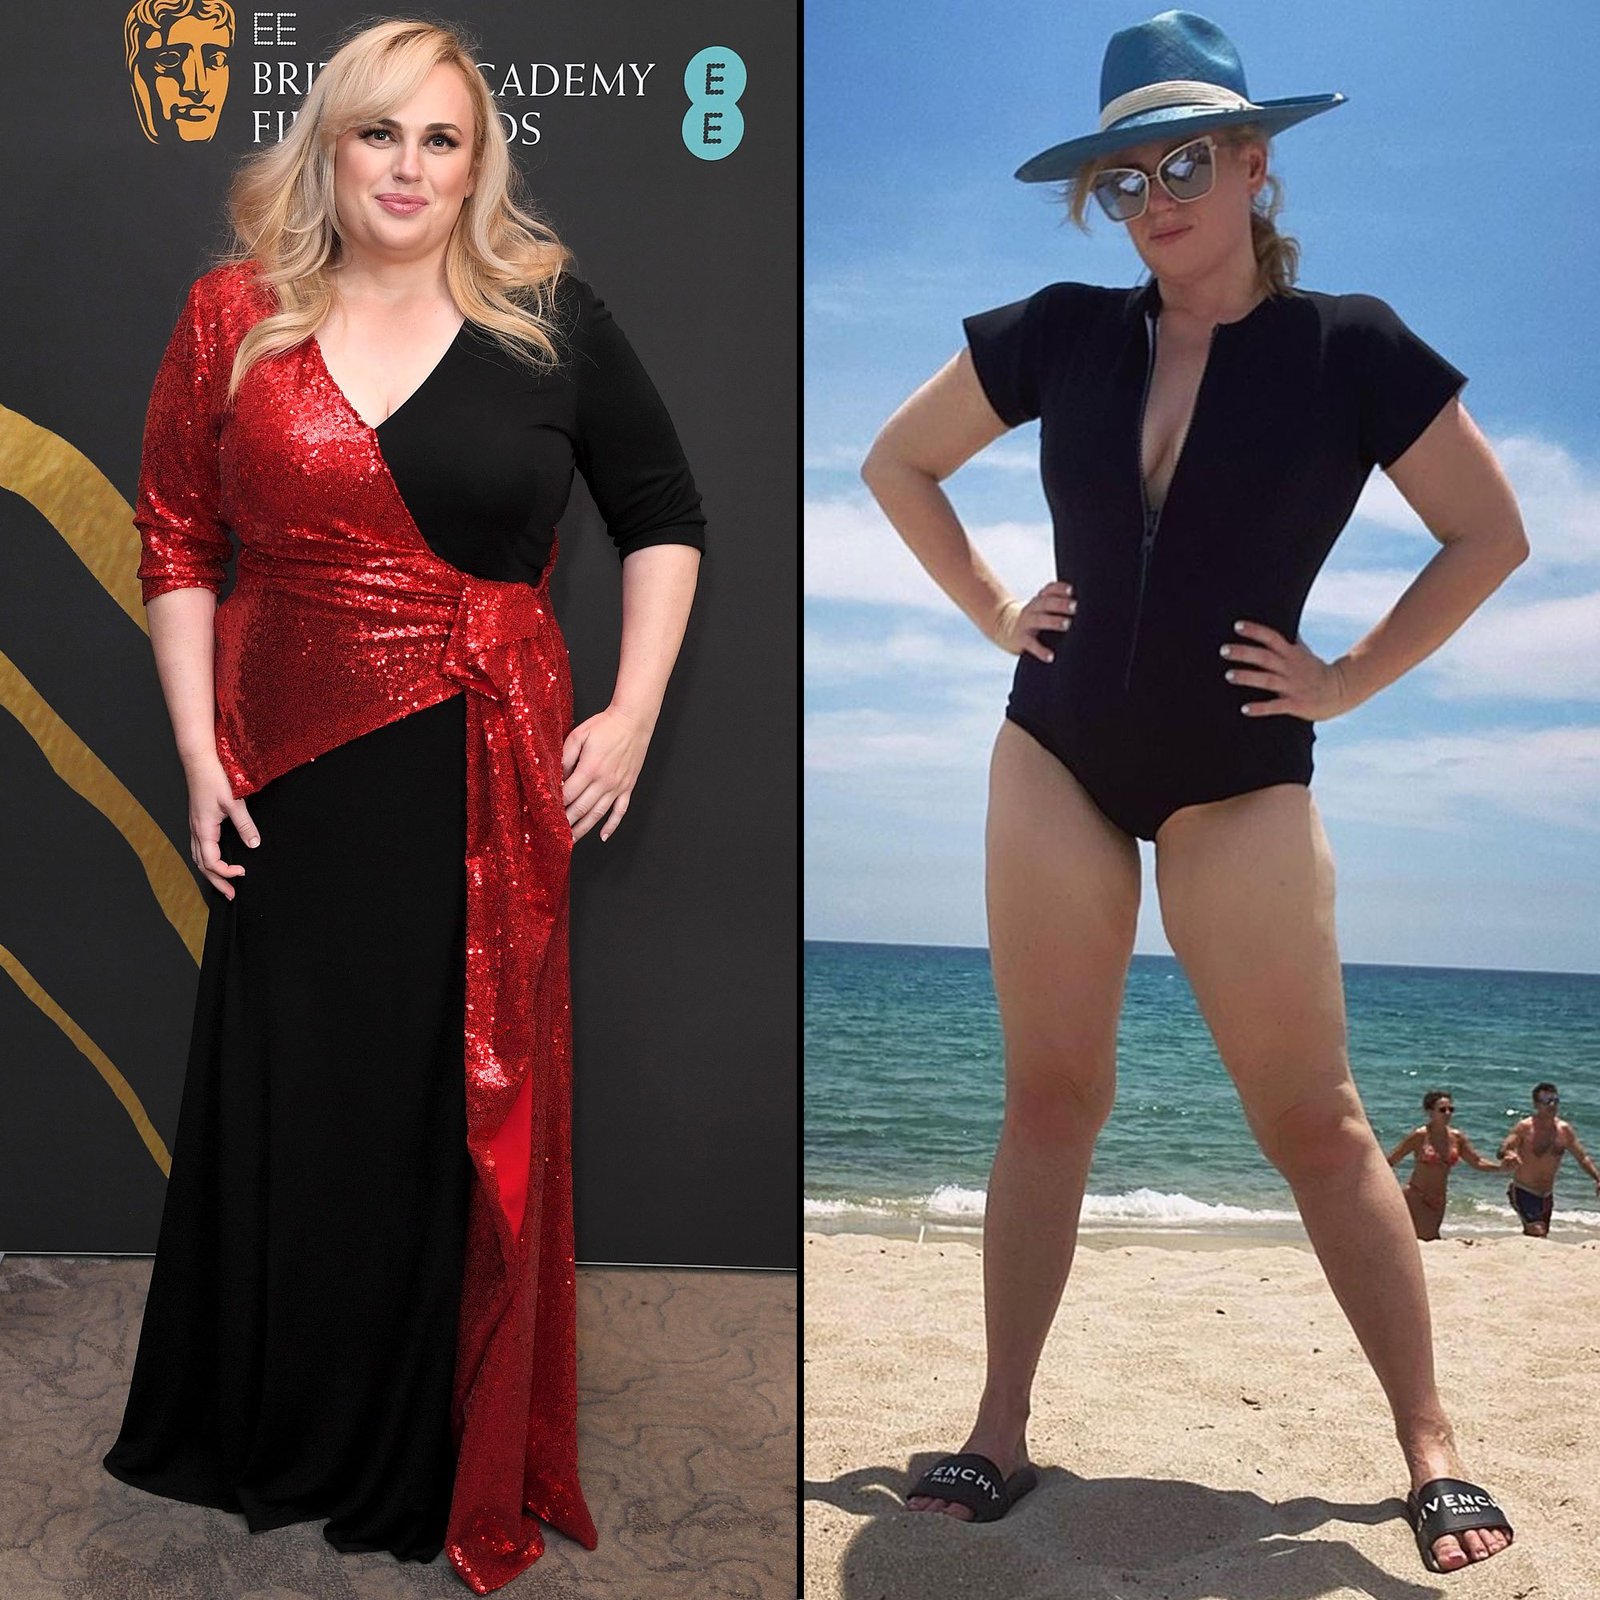 To have a better chance of becoming a mother one day: Rebel Wilson lost over 60 pounds